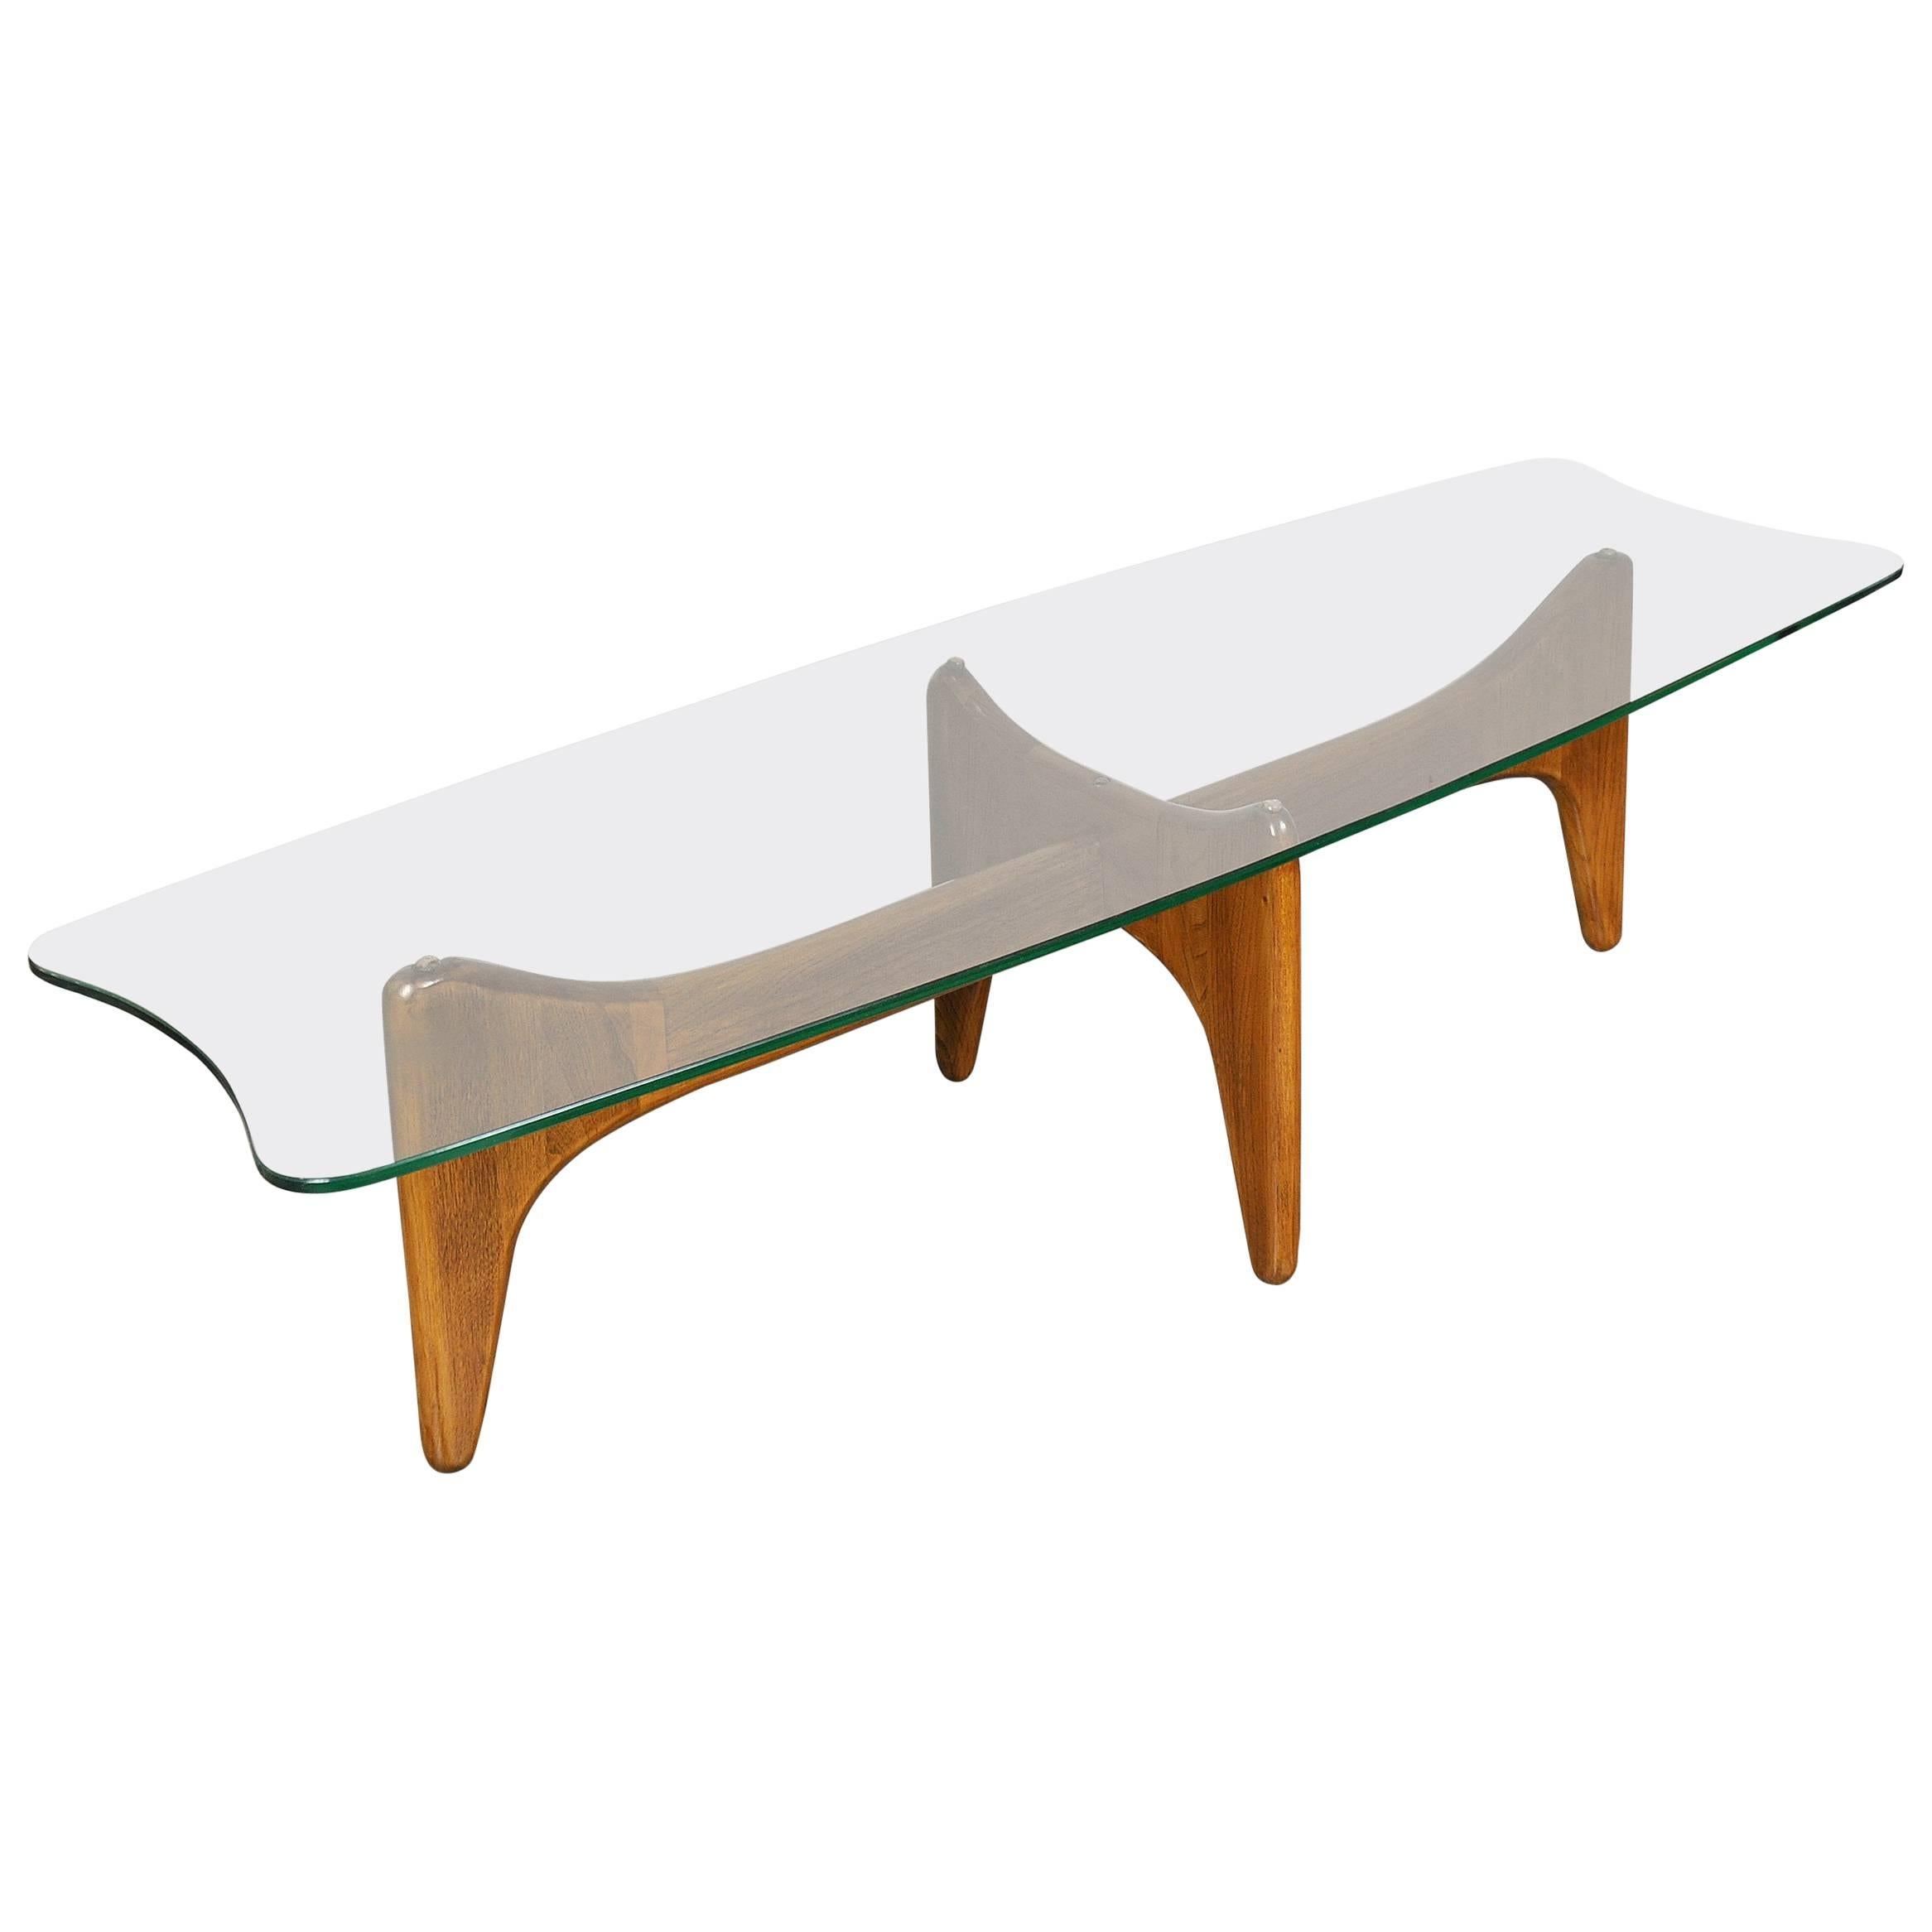 Adrian Pearsall for Craft Associates Stingray Coffee Table